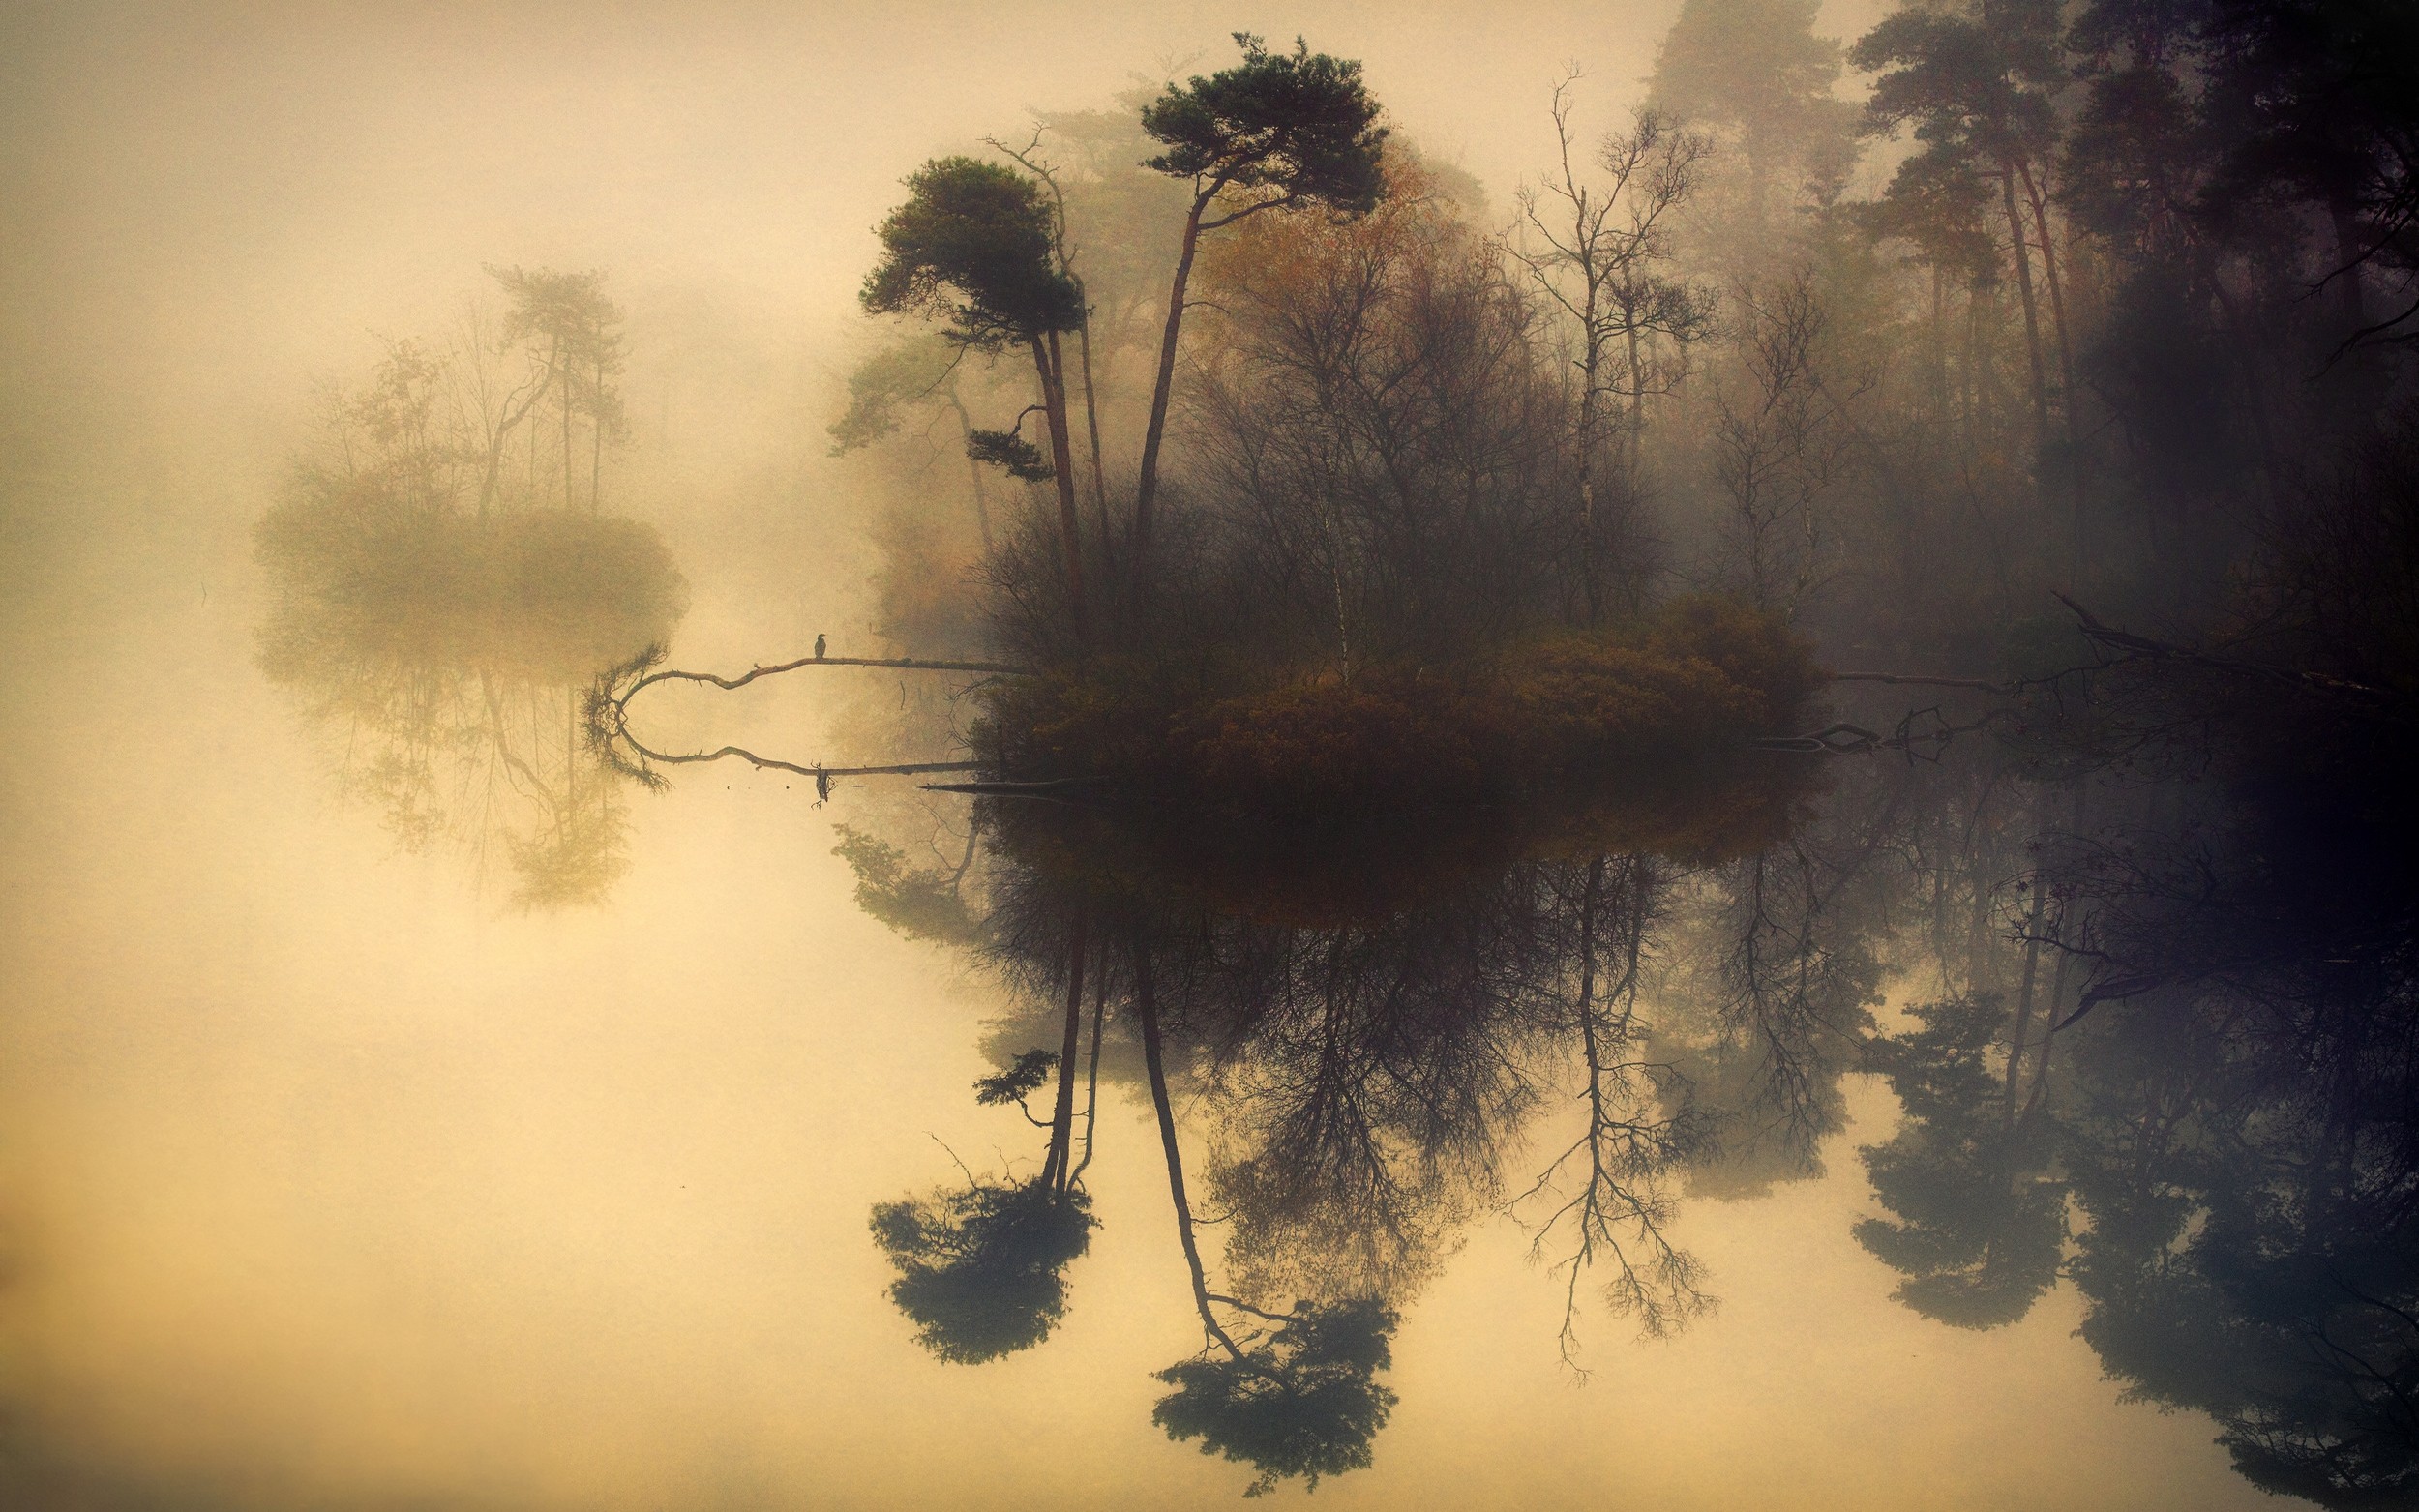 General 2500x1563 nature landscape mist lake trees water reflection shrubs fall birds calm morning beige pine trees